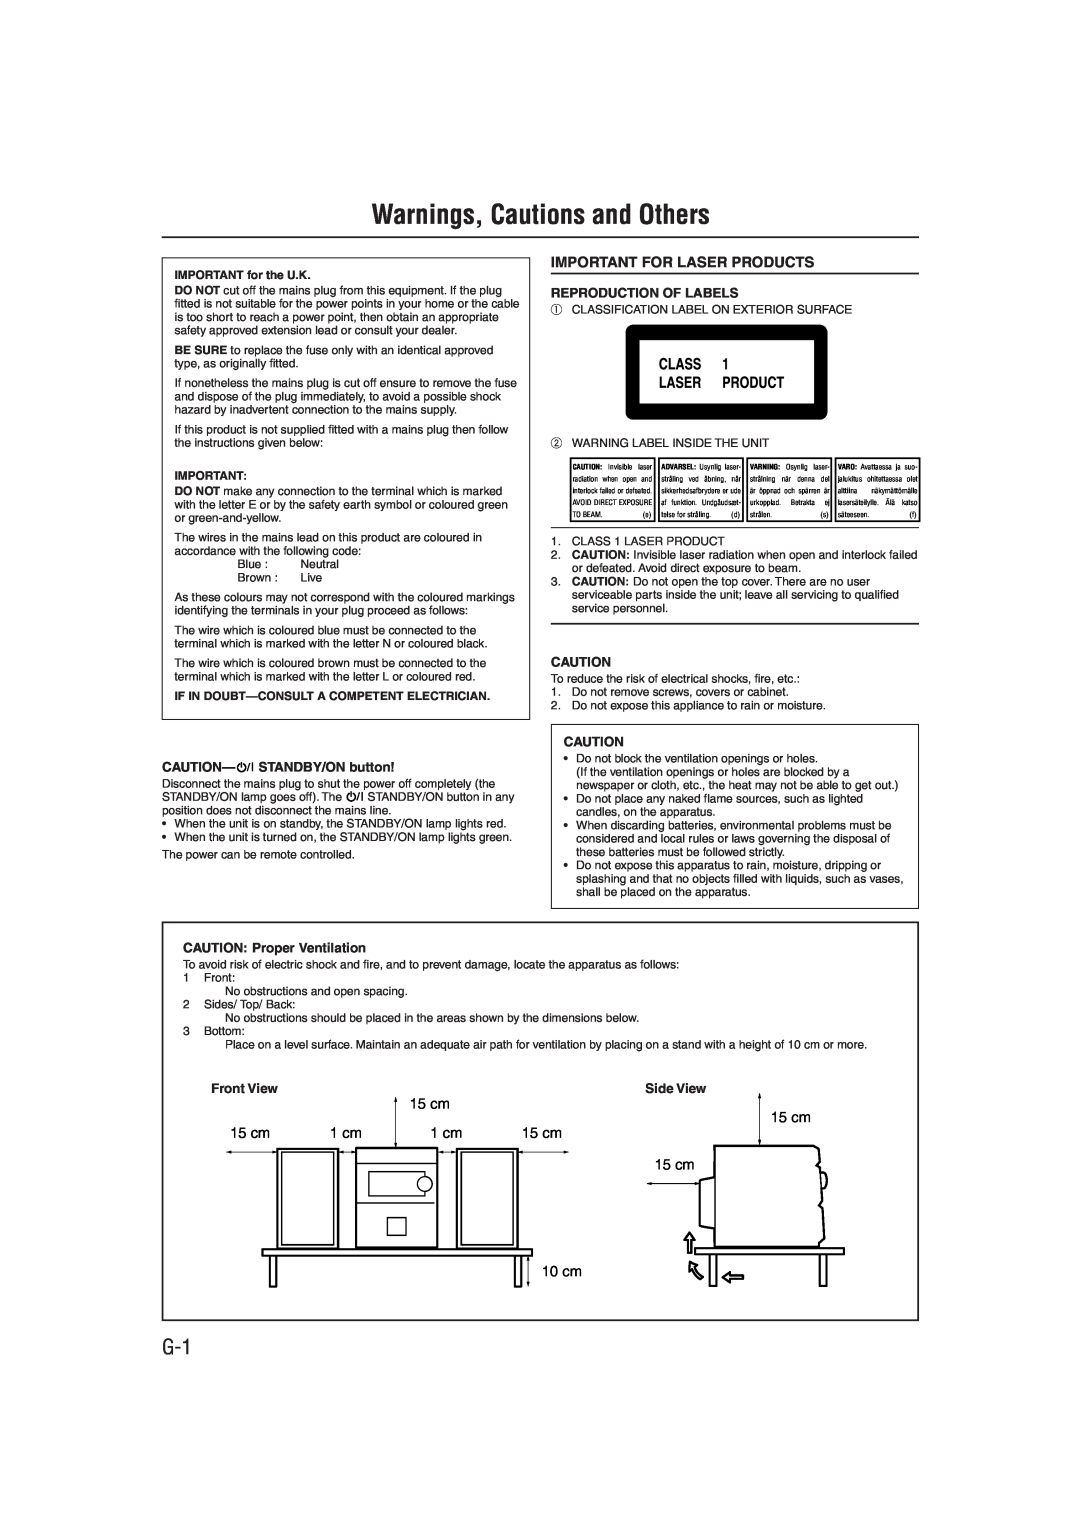 JVC UX-P55 manual Warnings, Cautions and Others, Important For Laser Products, 15 cm, 1 cm, 10 cm, Reproduction Of Labels 